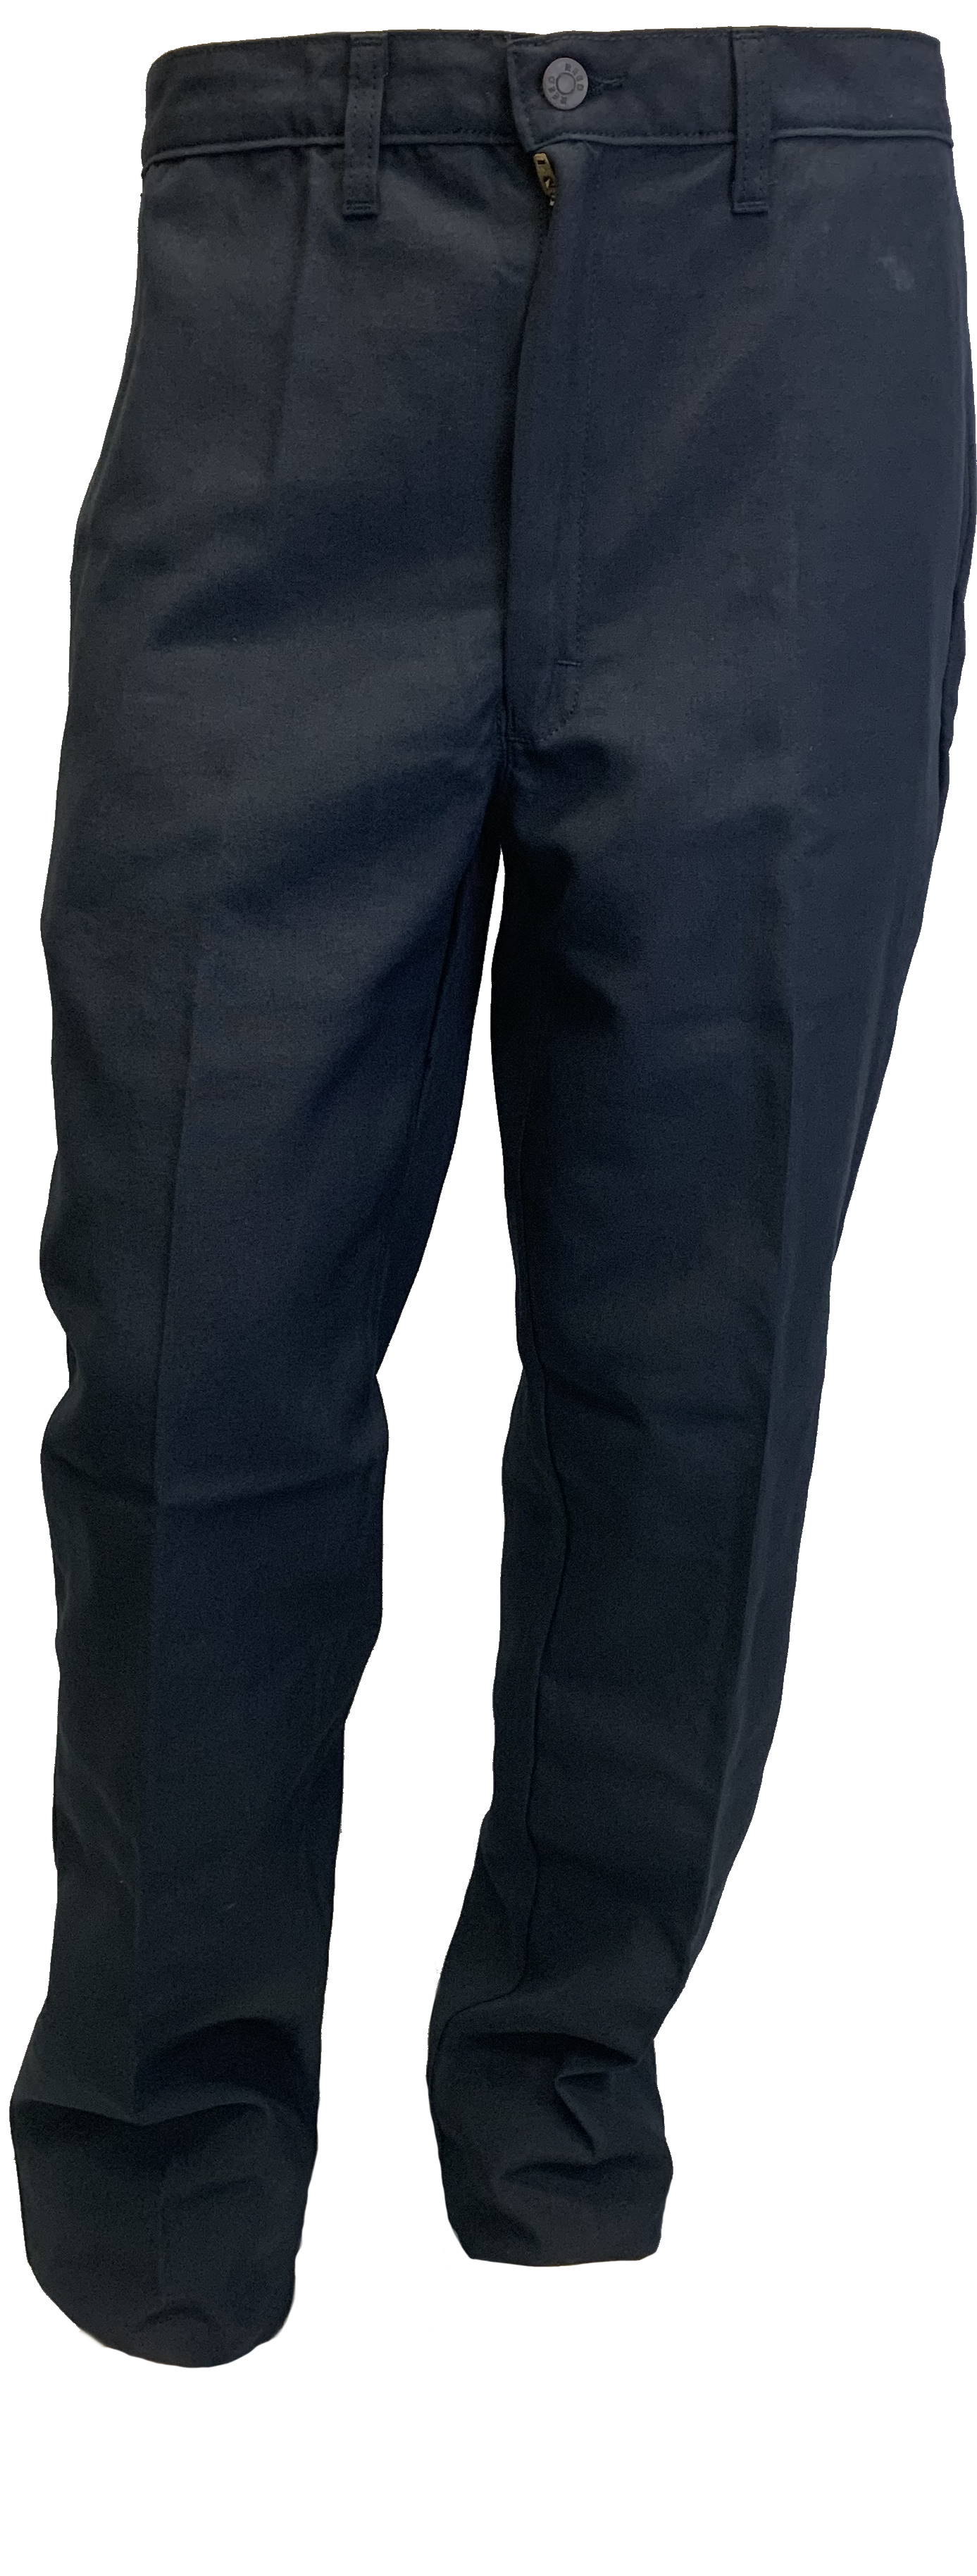 http://www.munrossafety.com/Shared/Images/Product/Reed-FR-Nomex-IIIA-Work-Pant-Navy/reed_nomex_pants.jpg